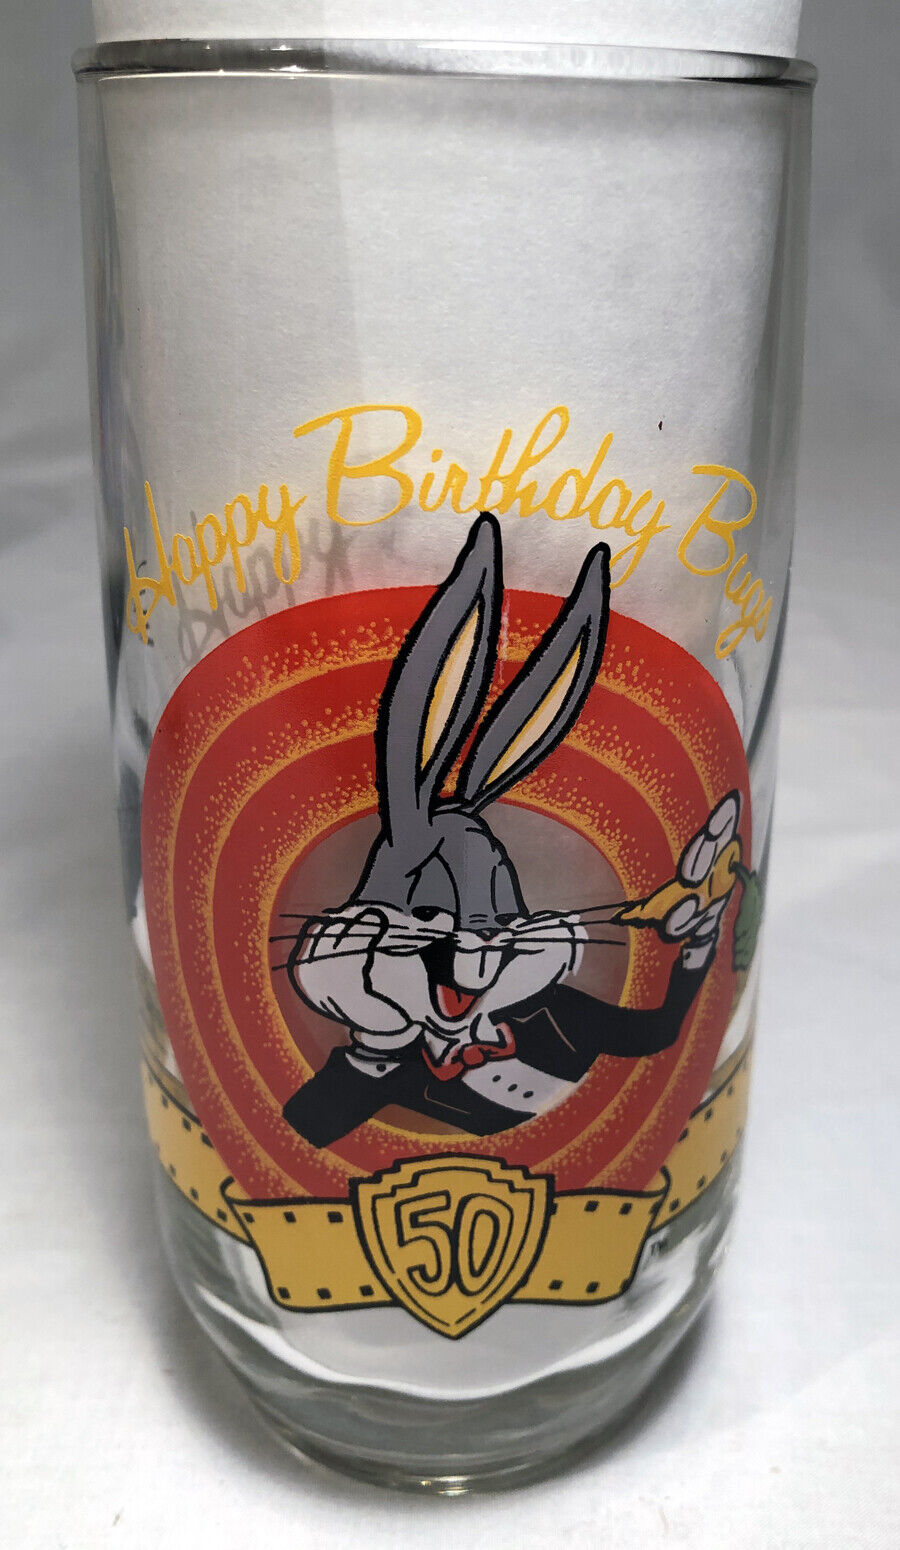 BUGS BUNNY - 50th BIRTHDAY GLASS 1990 - LOONEY TUNES/WARNER BROTHERS - RARE~NOS